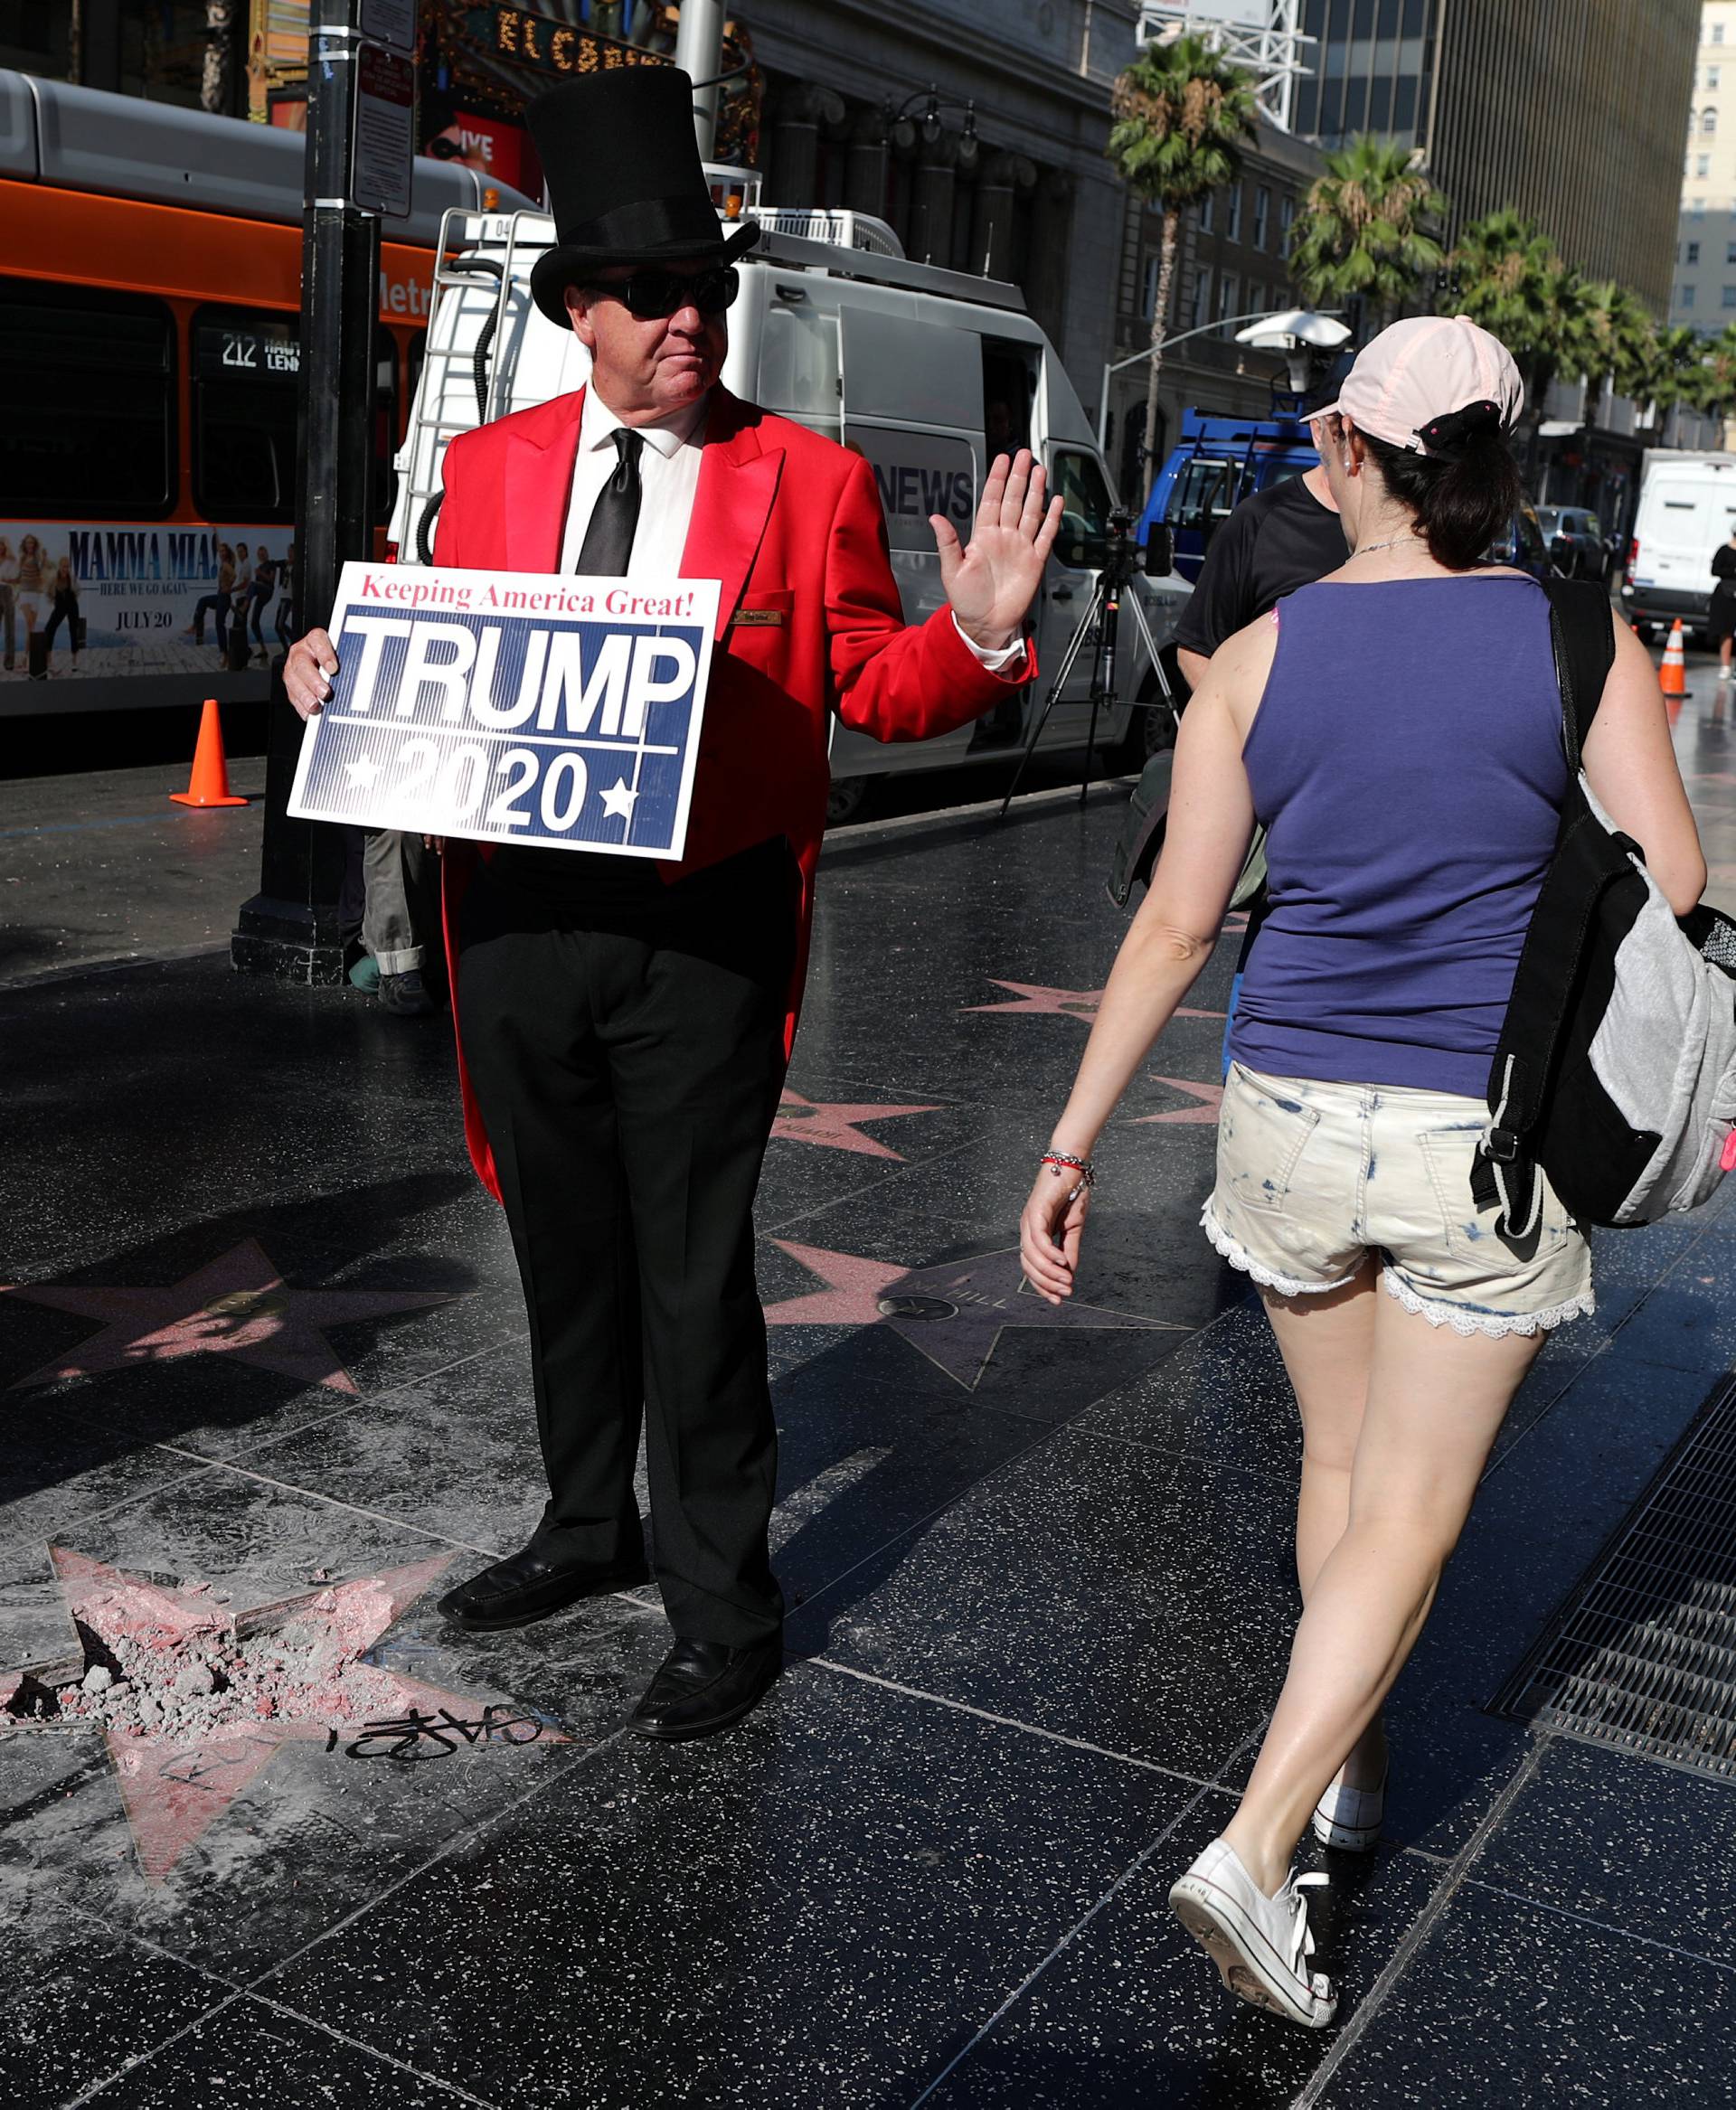 Greg Donovan, 58, waves at a woman walking on Hollywood Boulevard as he stands on President Donald Trump's vandalized star on the Hollywood Walk of Fame in Hollywood, Los Angeles